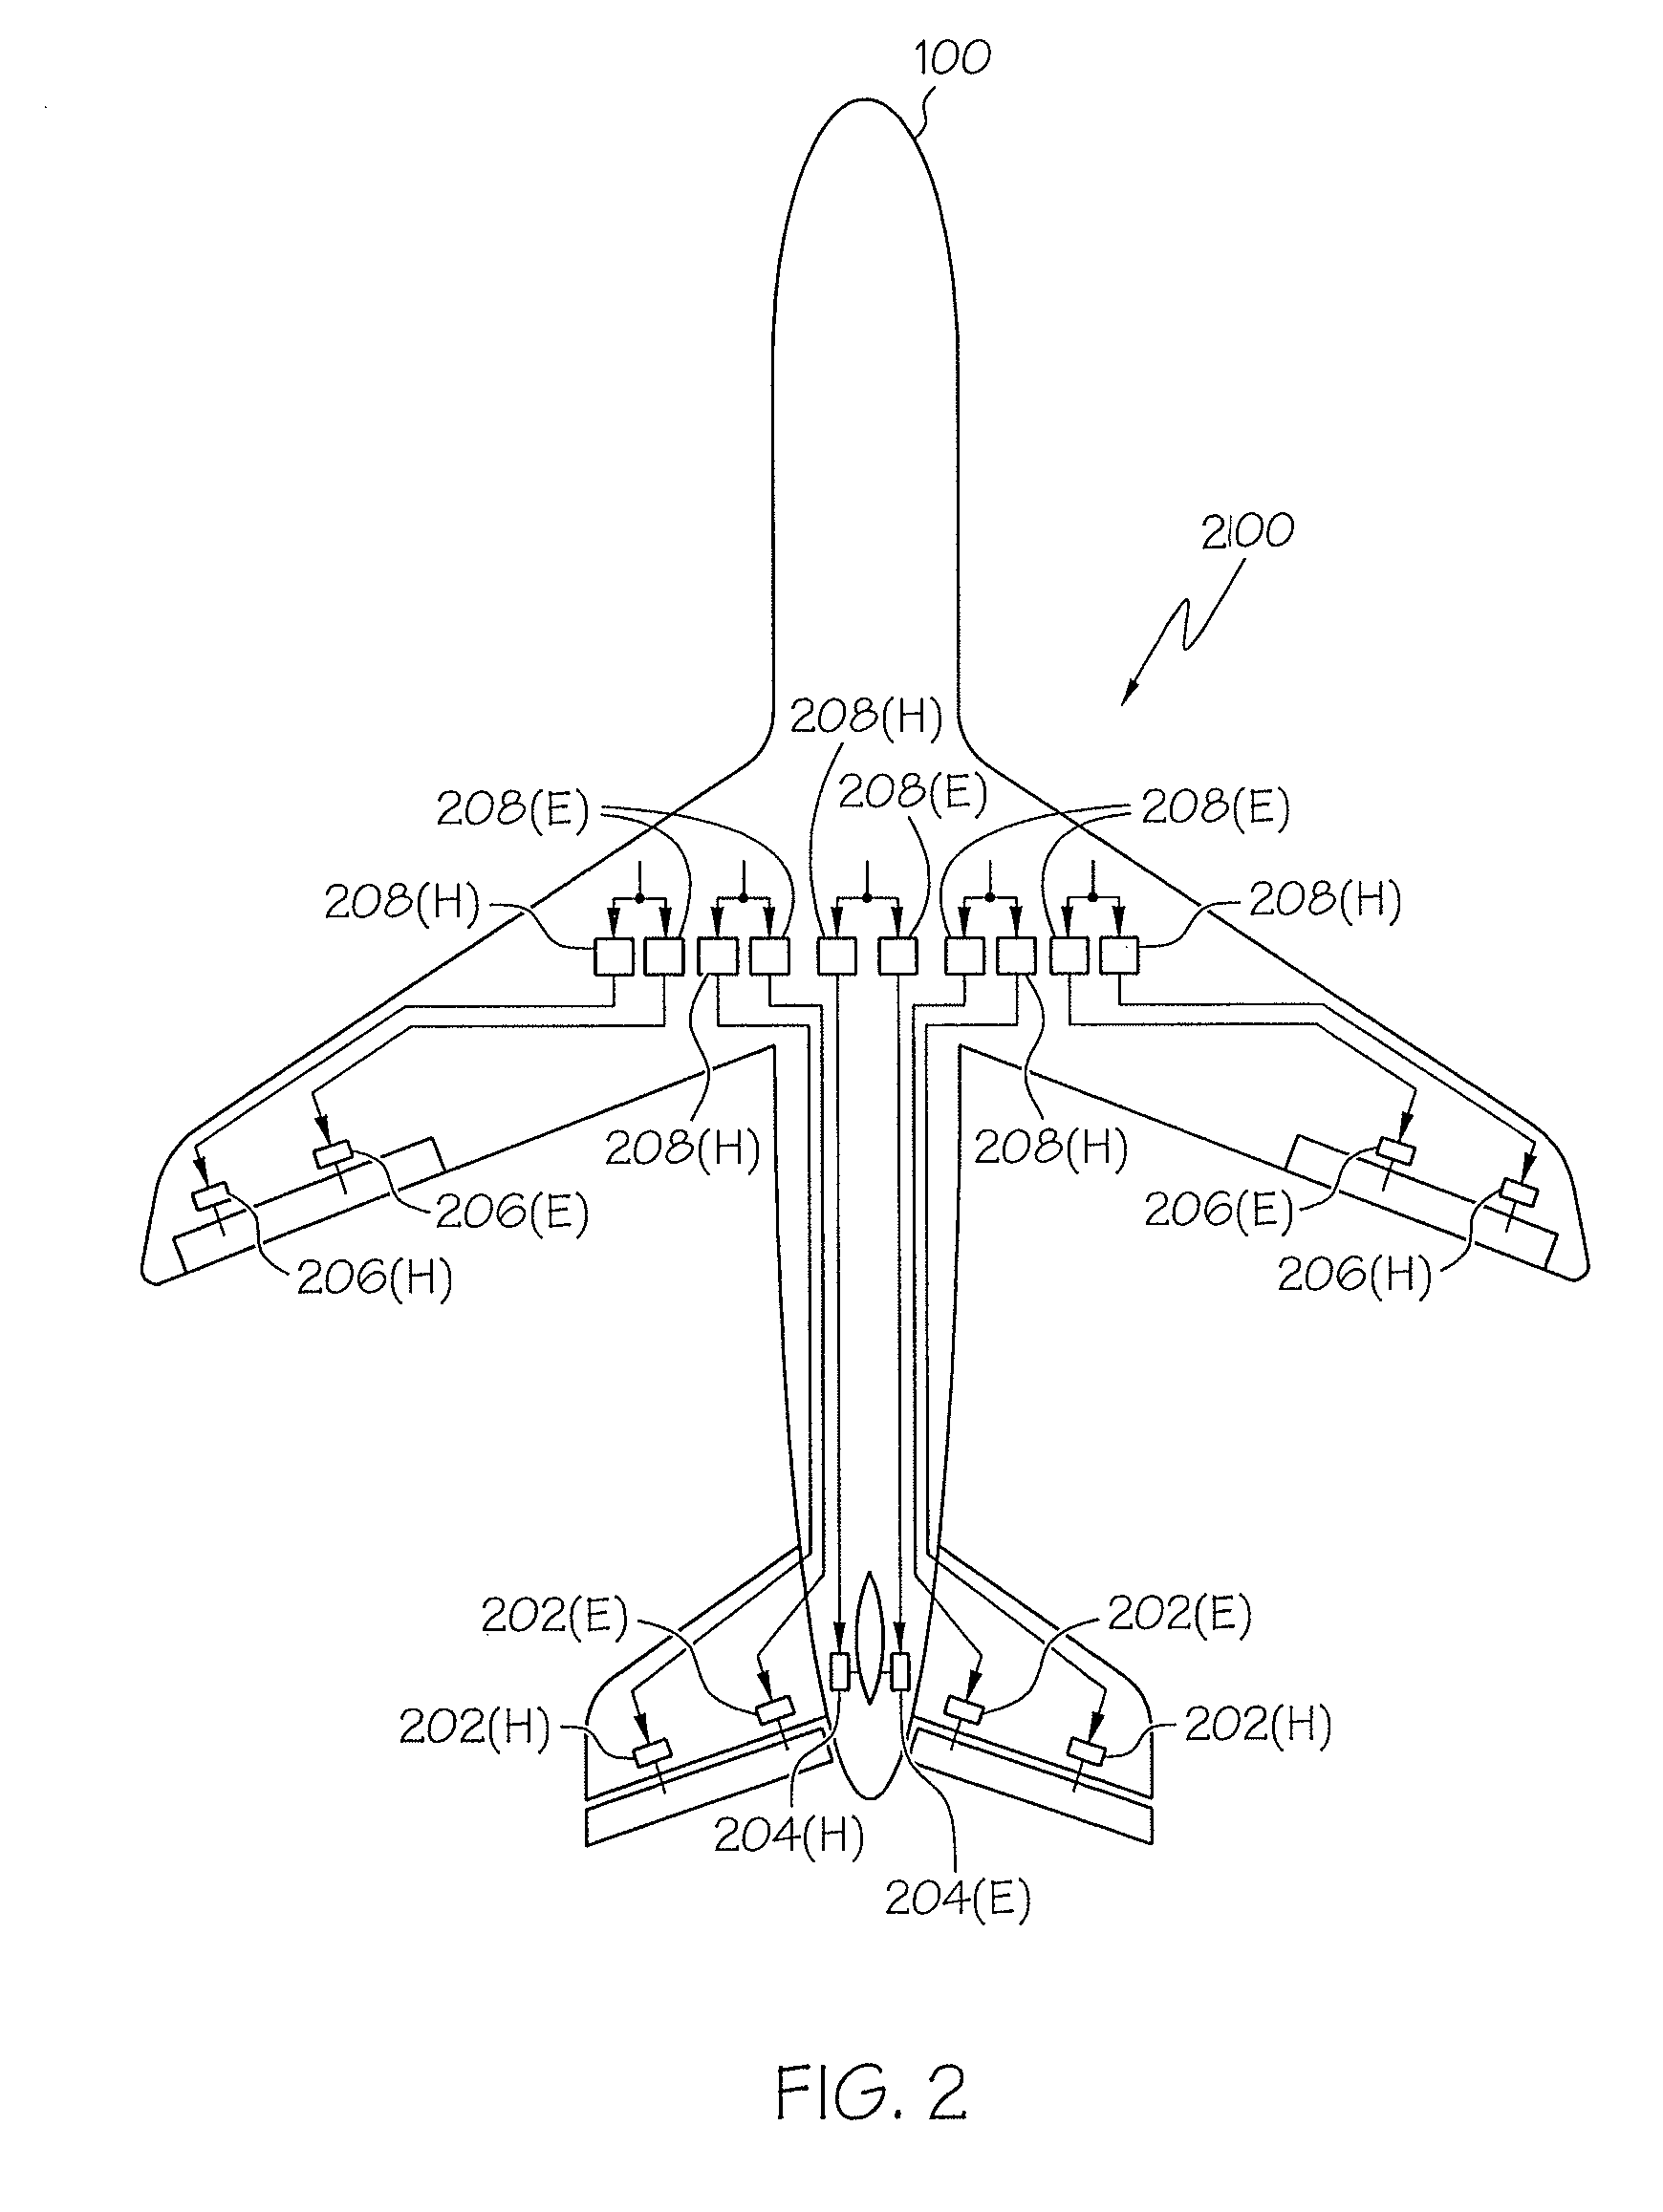 Load optimized redundant flight control surface actuation system and method